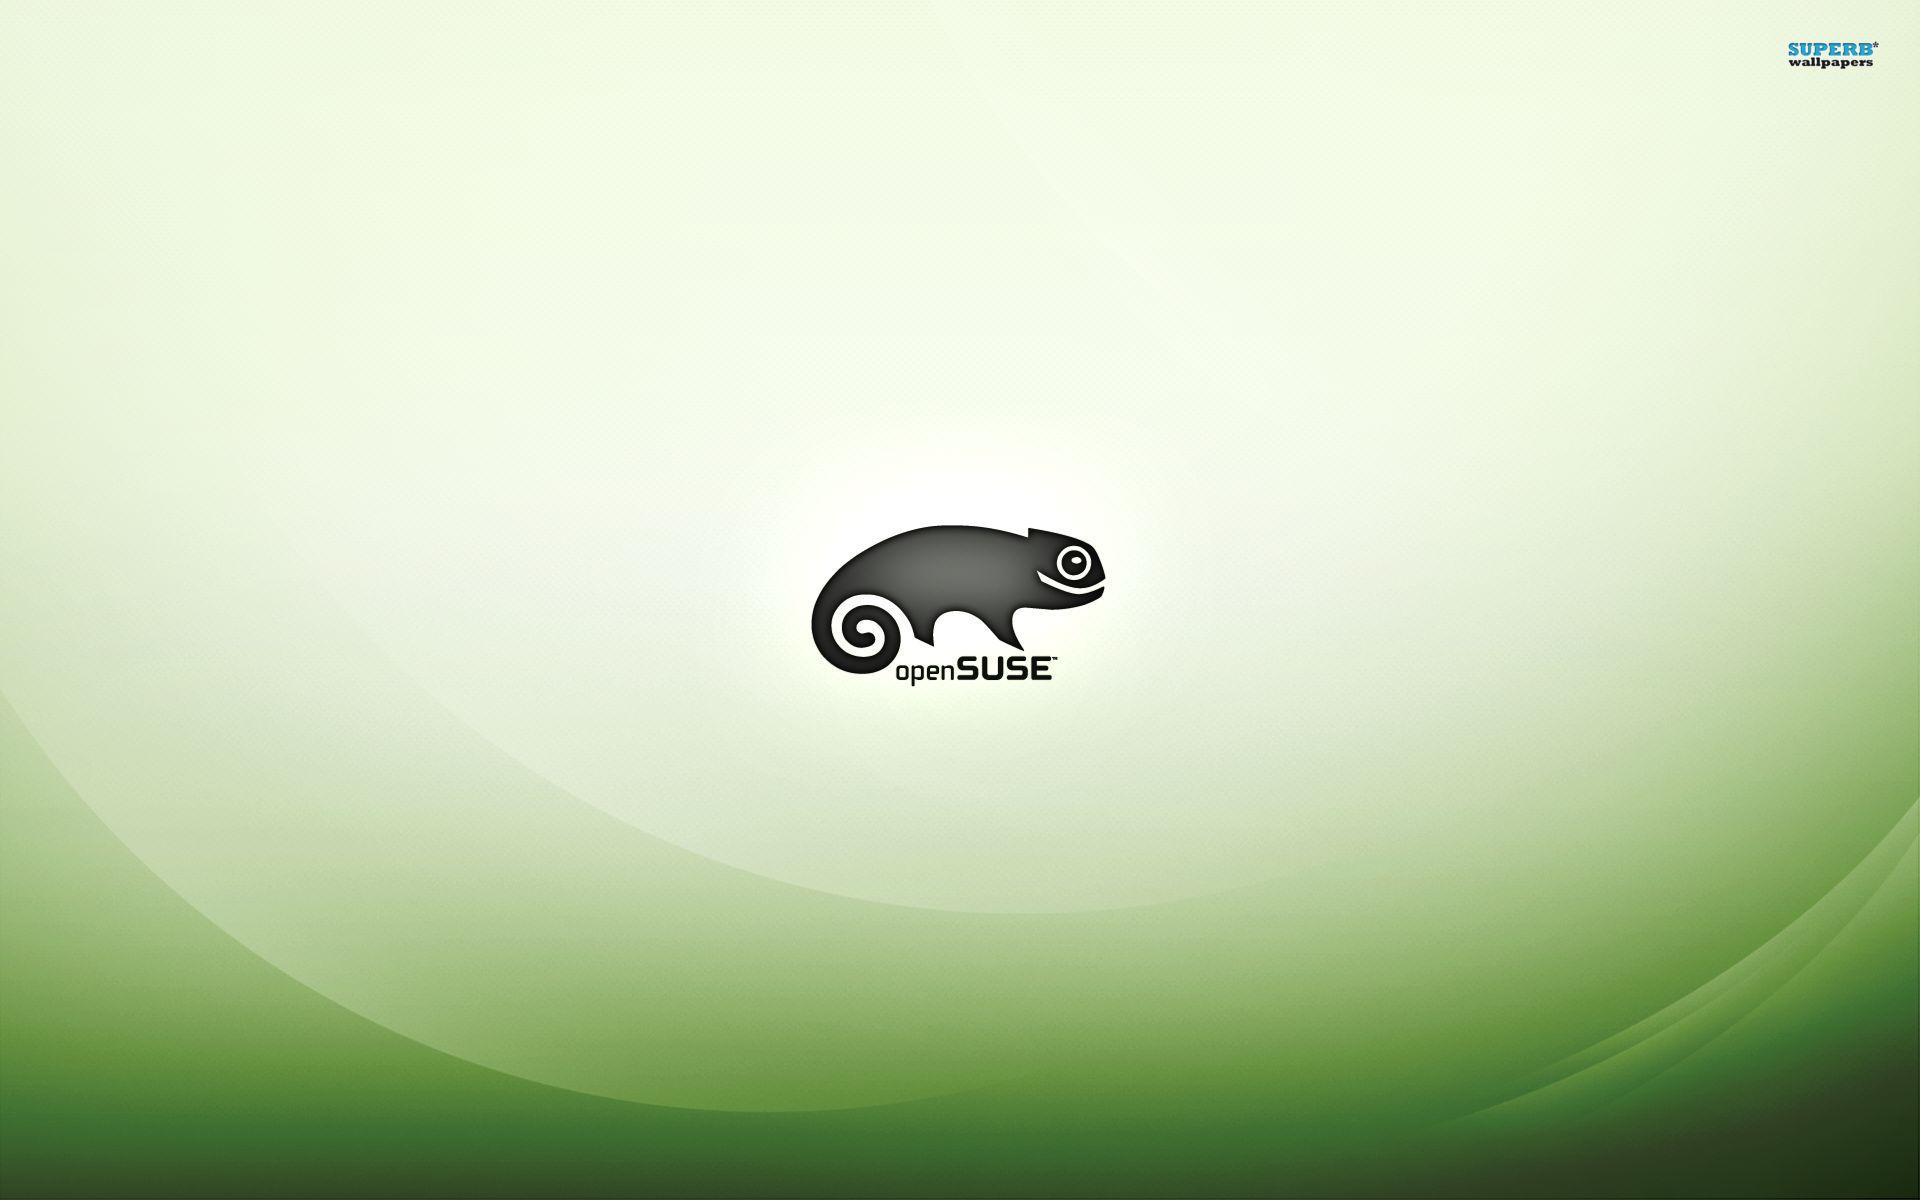 OpenSUSE wallpaper - Computer wallpapers -